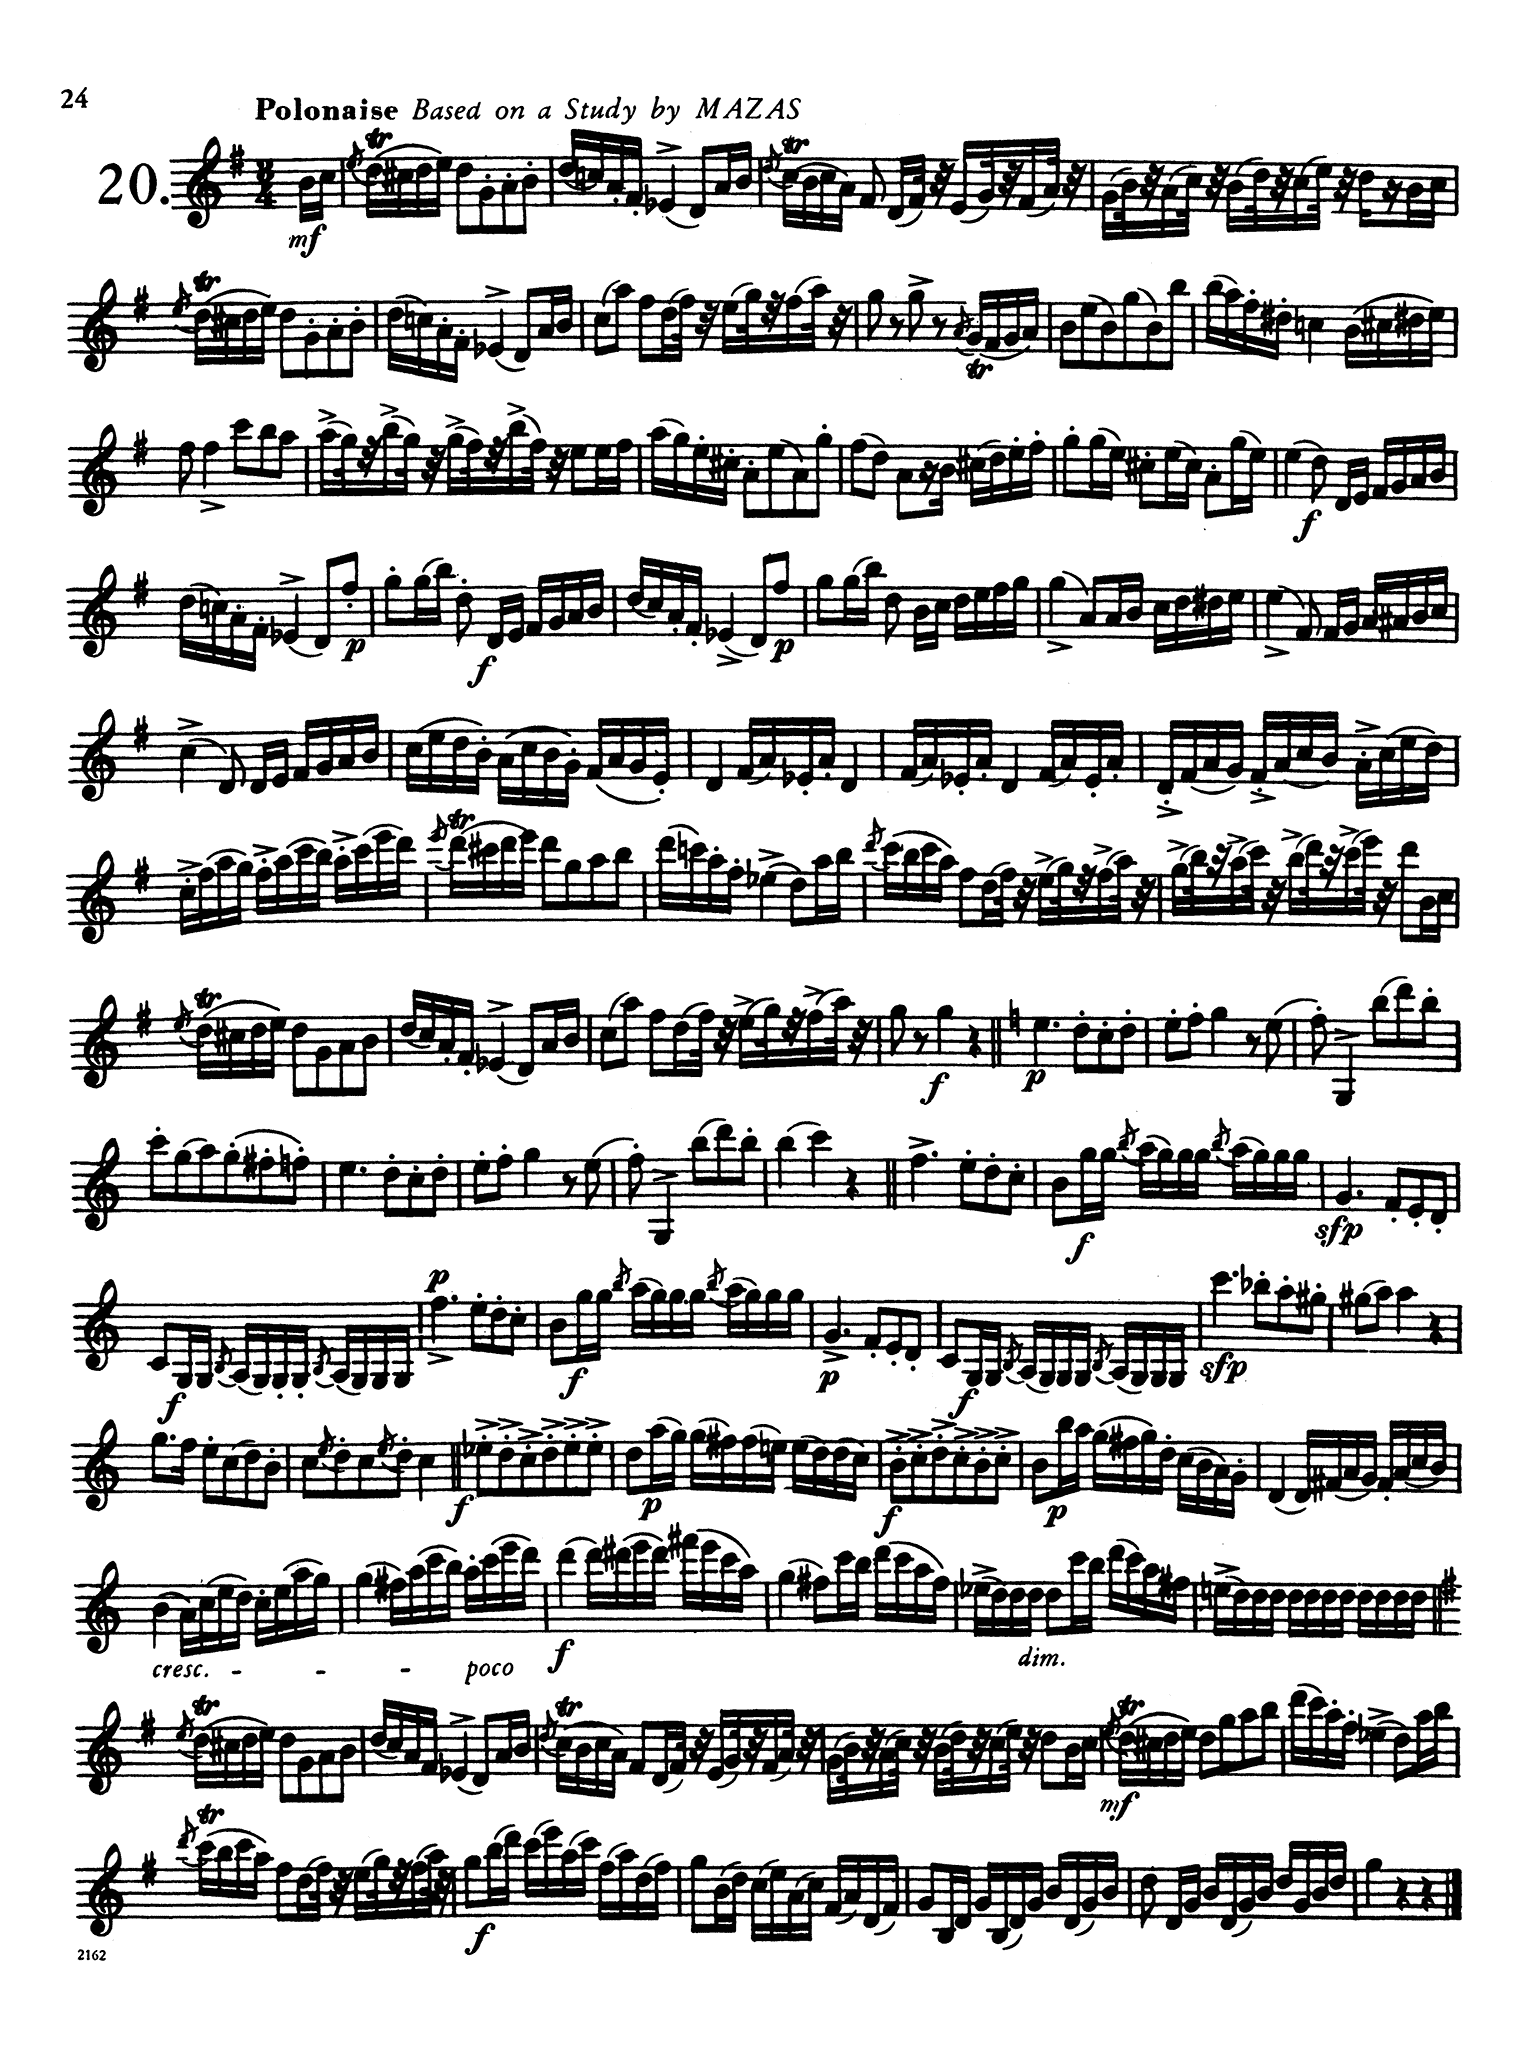 40 Études for Clarinet, Book 1 of 2 Page 24